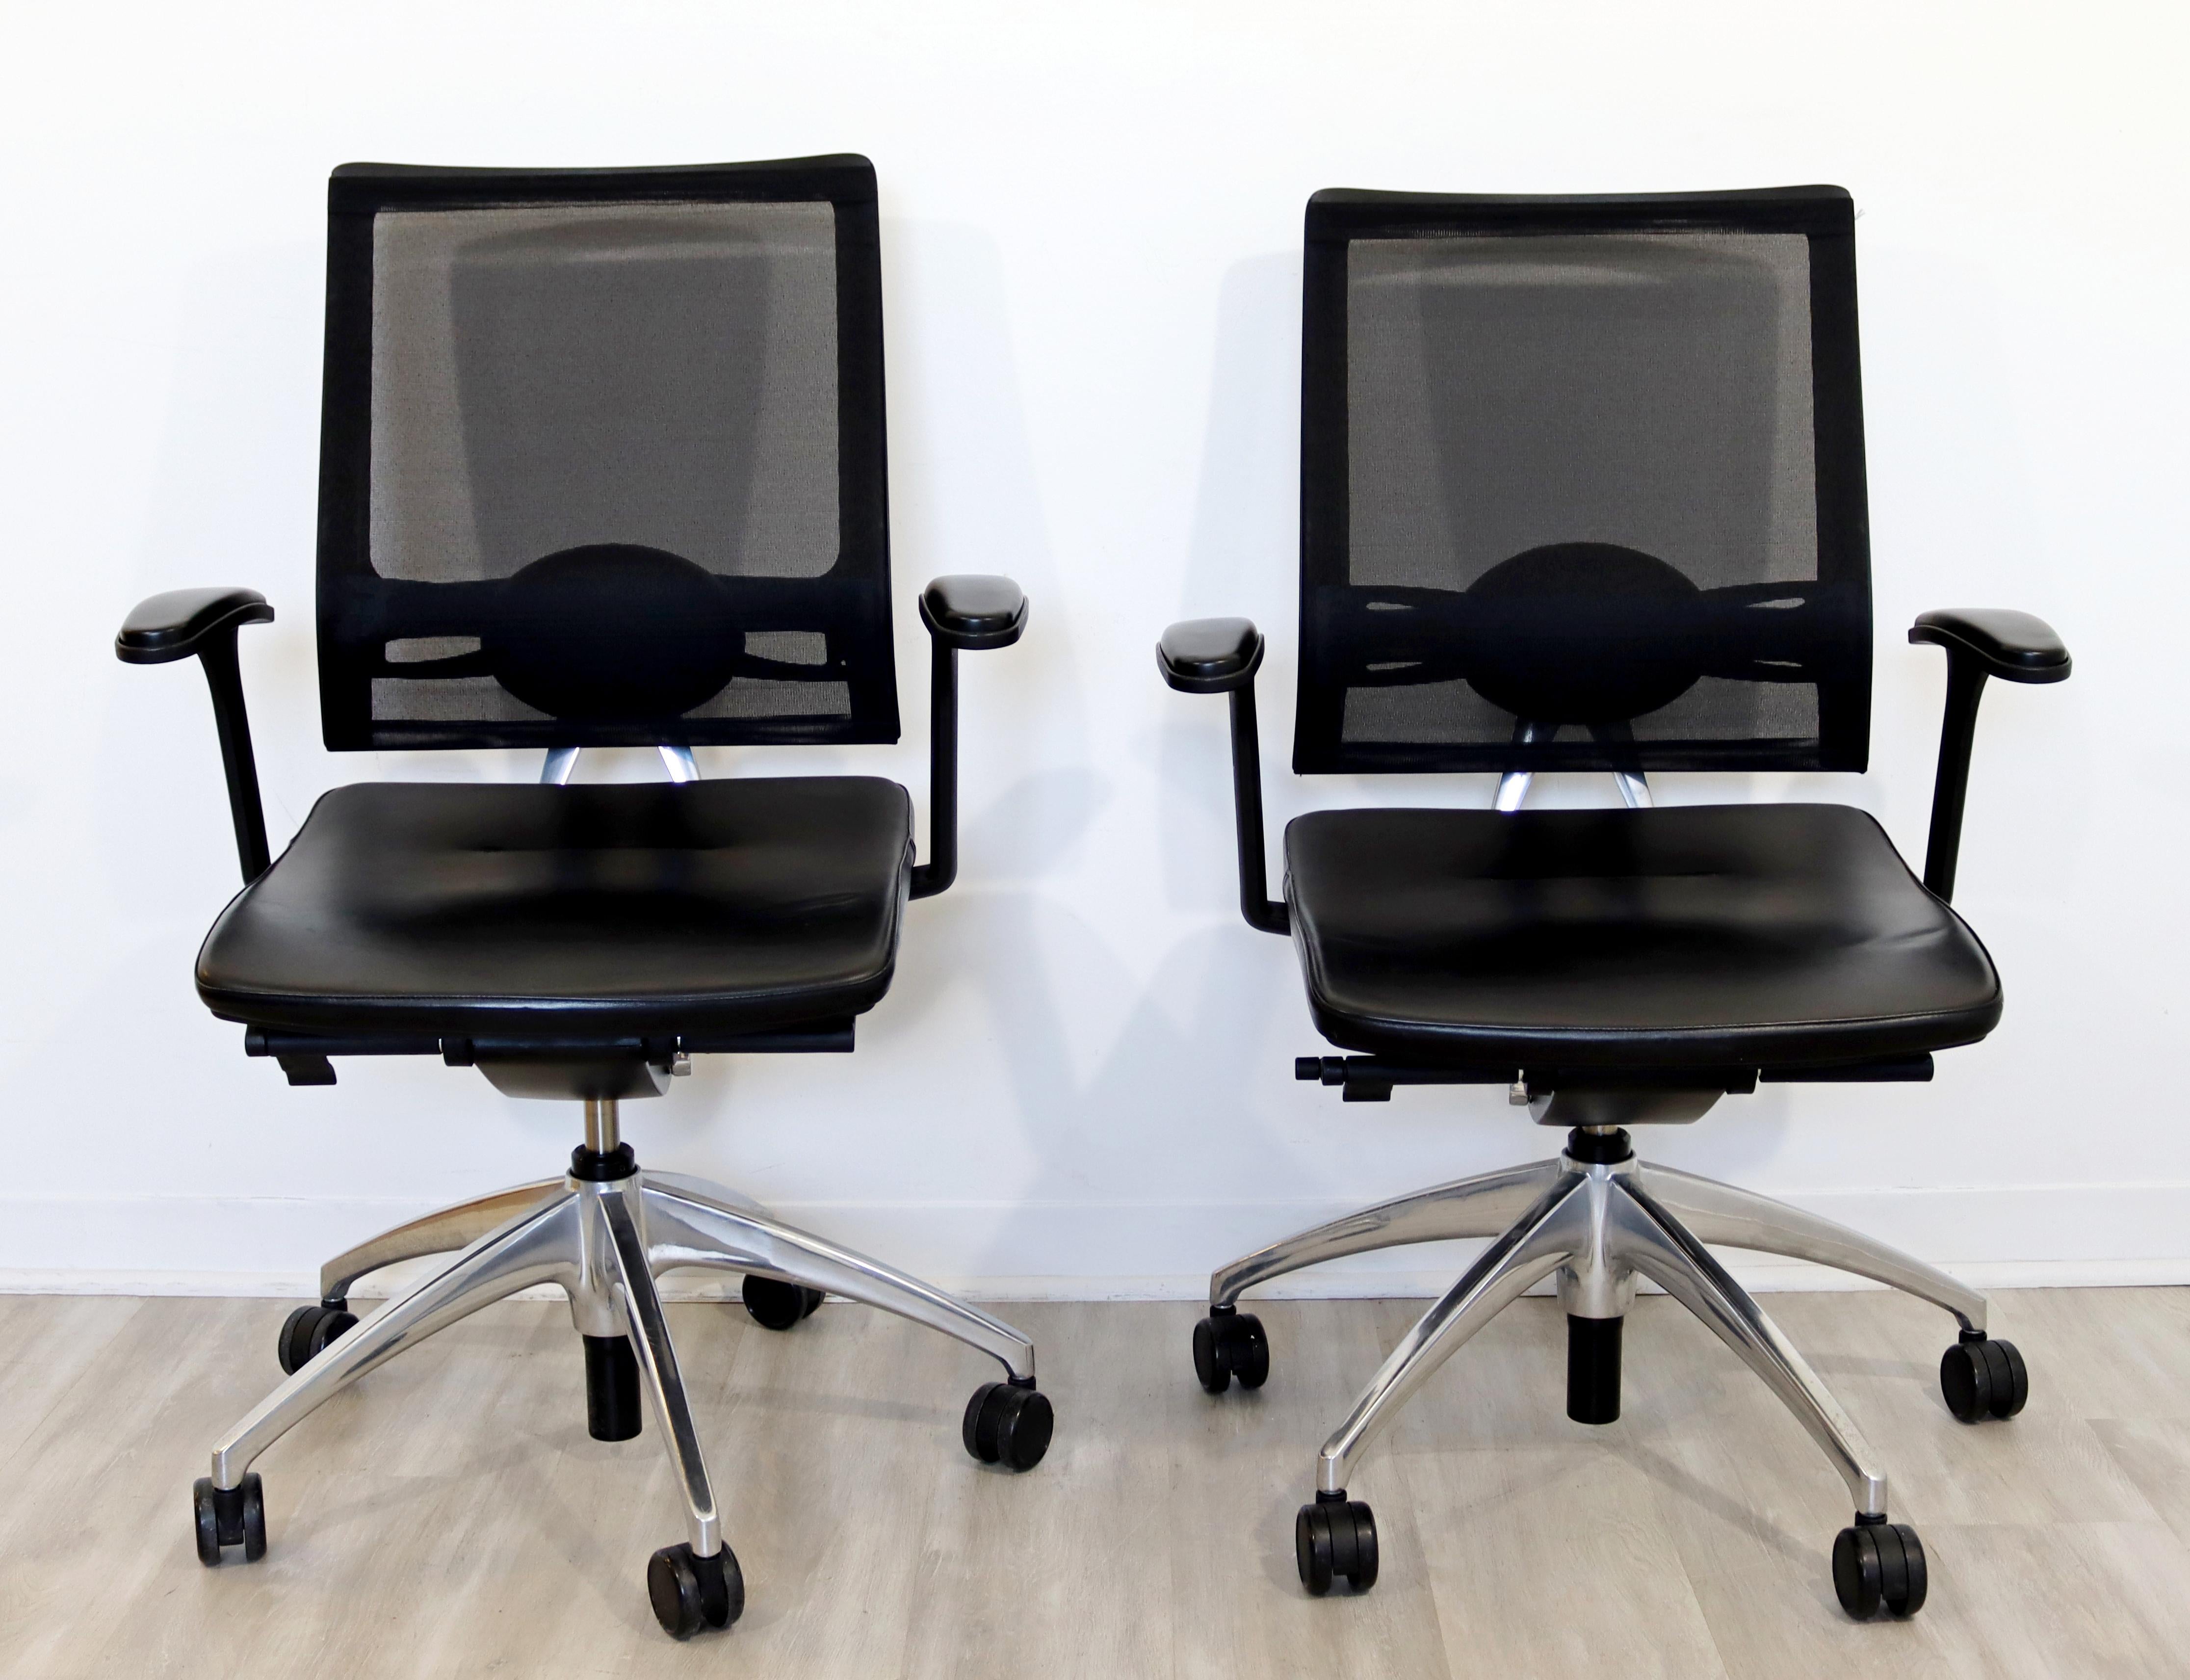 For your consideration is a gorgeous pair of Knoll rolling office chairs, on chrome bases, circa 2007. In excellent condition. The dimensions are 27